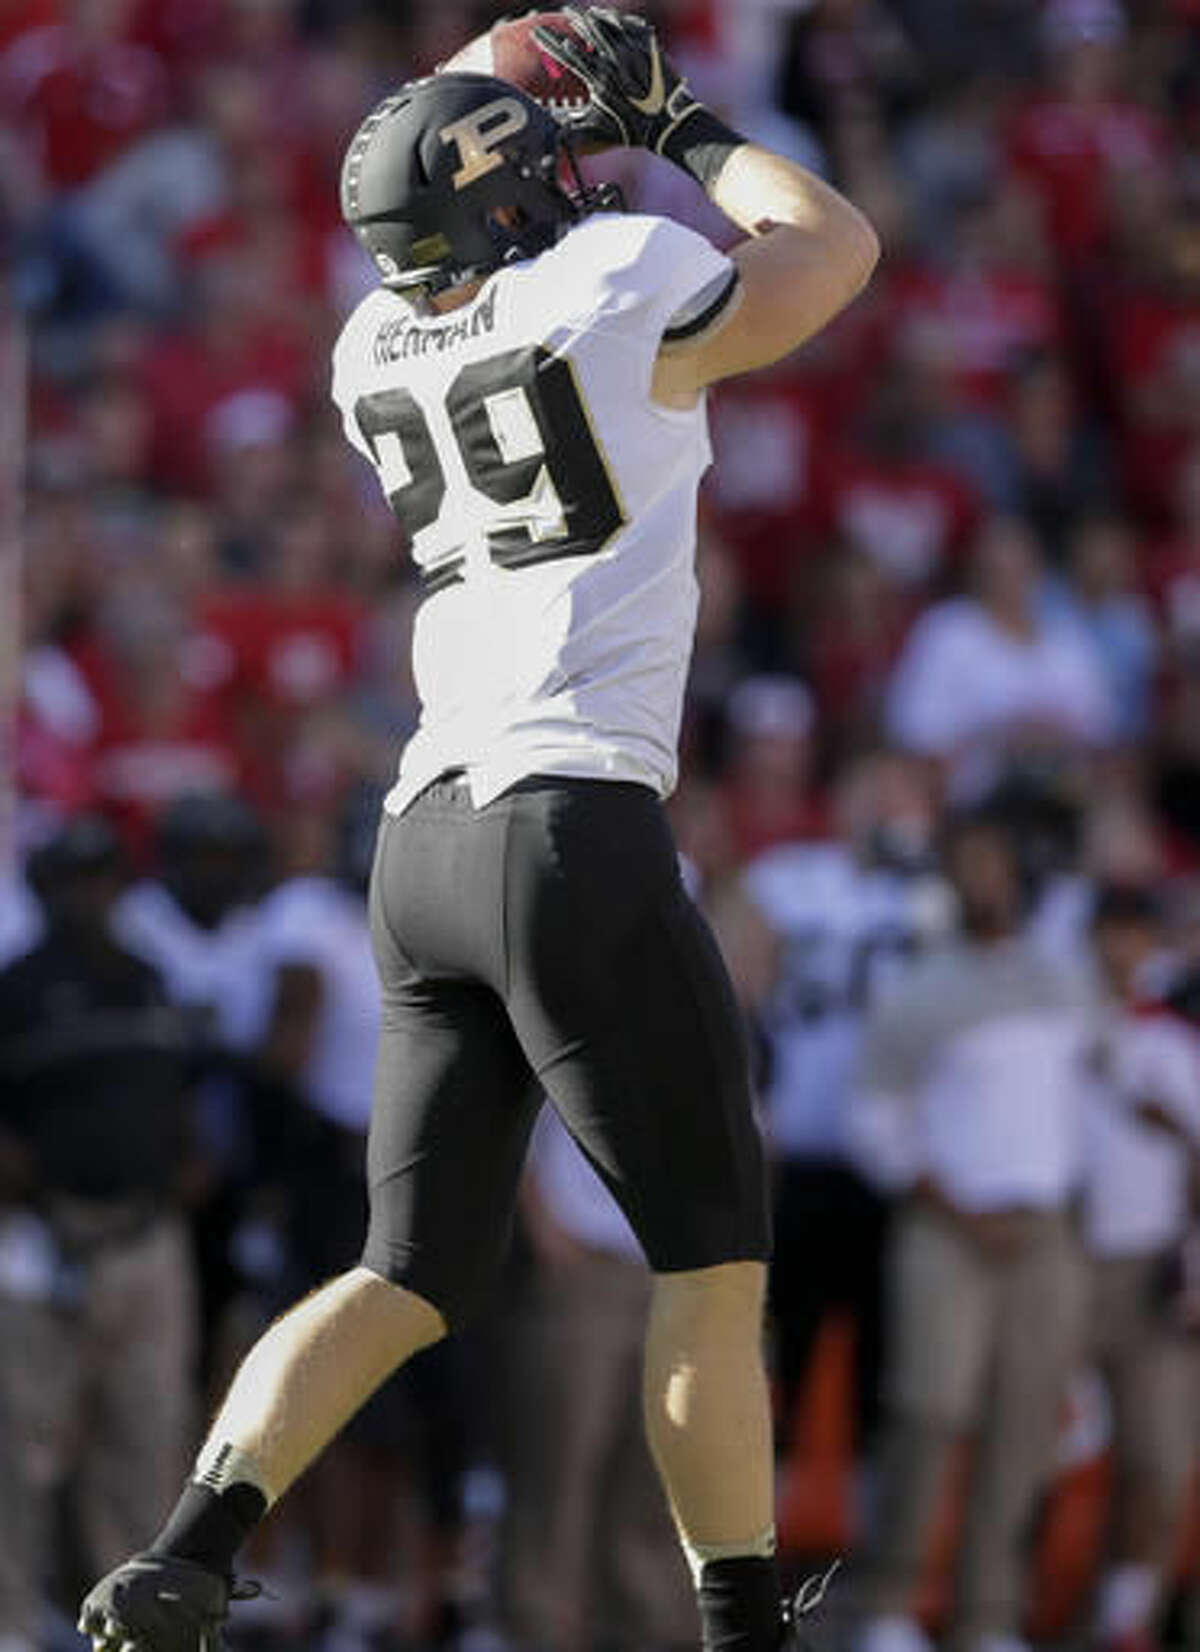 Purdue linebacker Jimmy Herman (29) intercepts a ball thrown by Nebraska quarterback Tommy Armstrong Jr. during the first half of an NCAA college football game in Lincoln, Neb., Saturday, Oct. 22, 2016. (AP Photo/Nati Harnik)